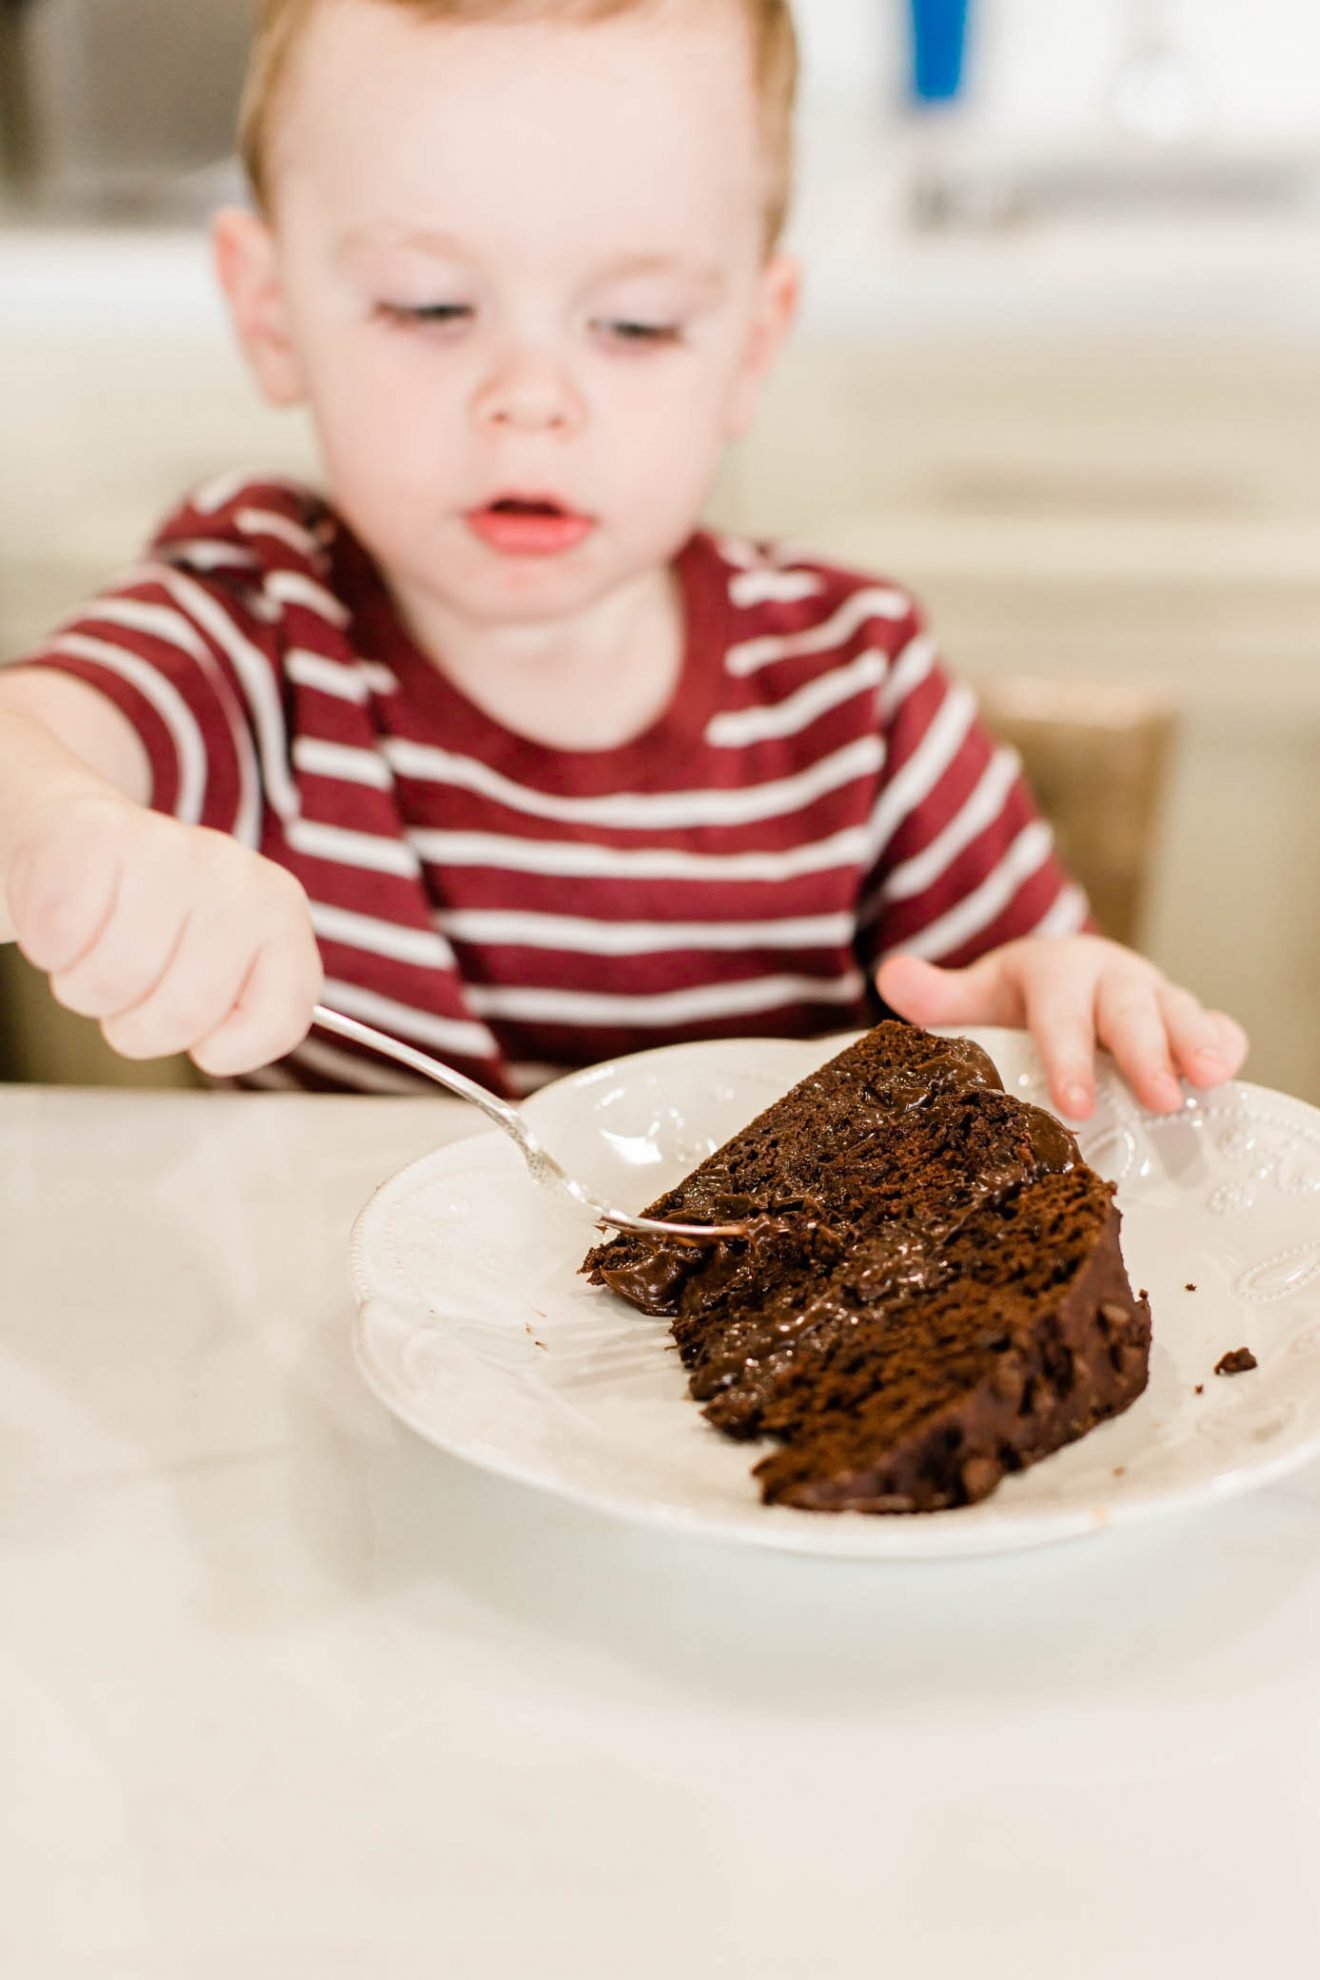 Toddler boy using a fork to take a piece of his chocolate cake.